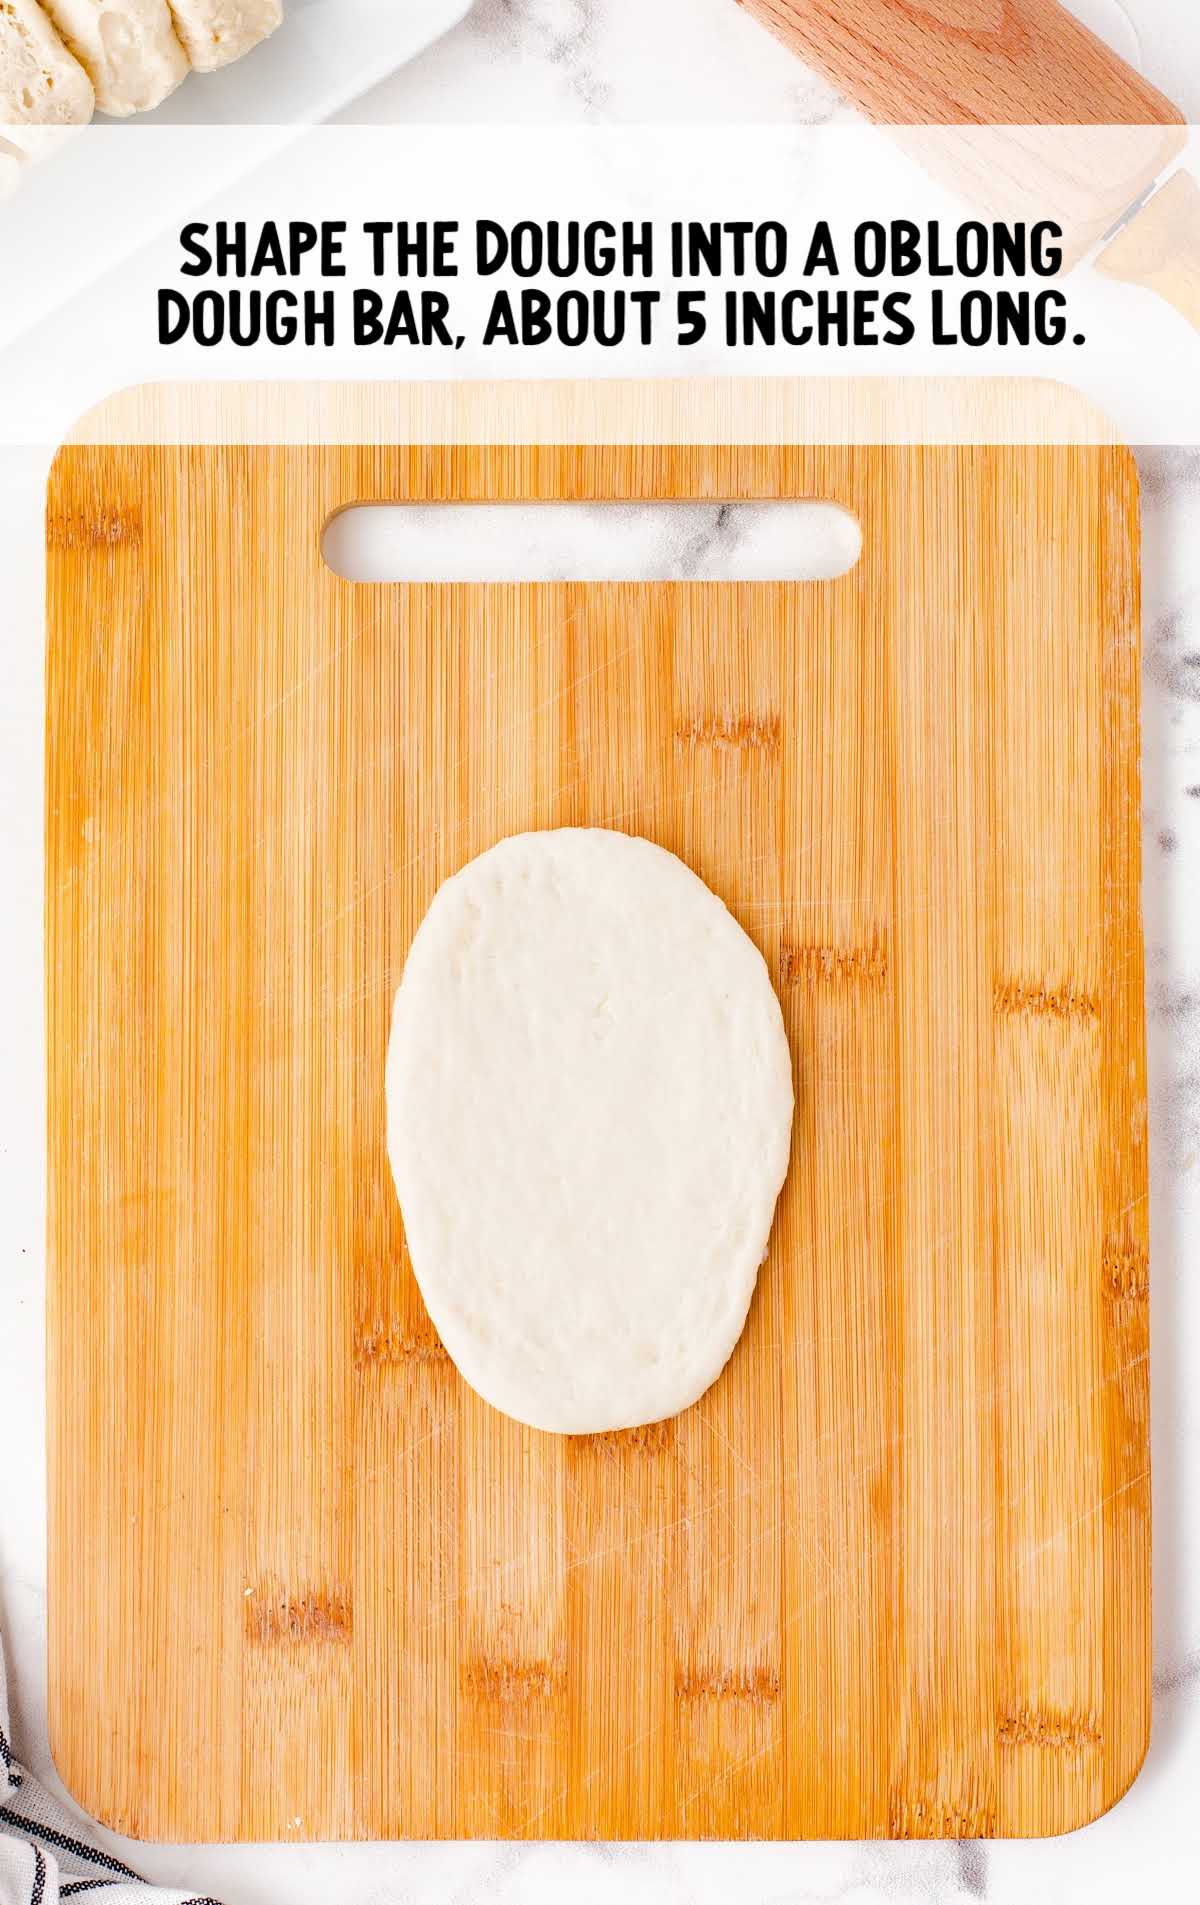 dough shaped into a oblong bar on a cutting board